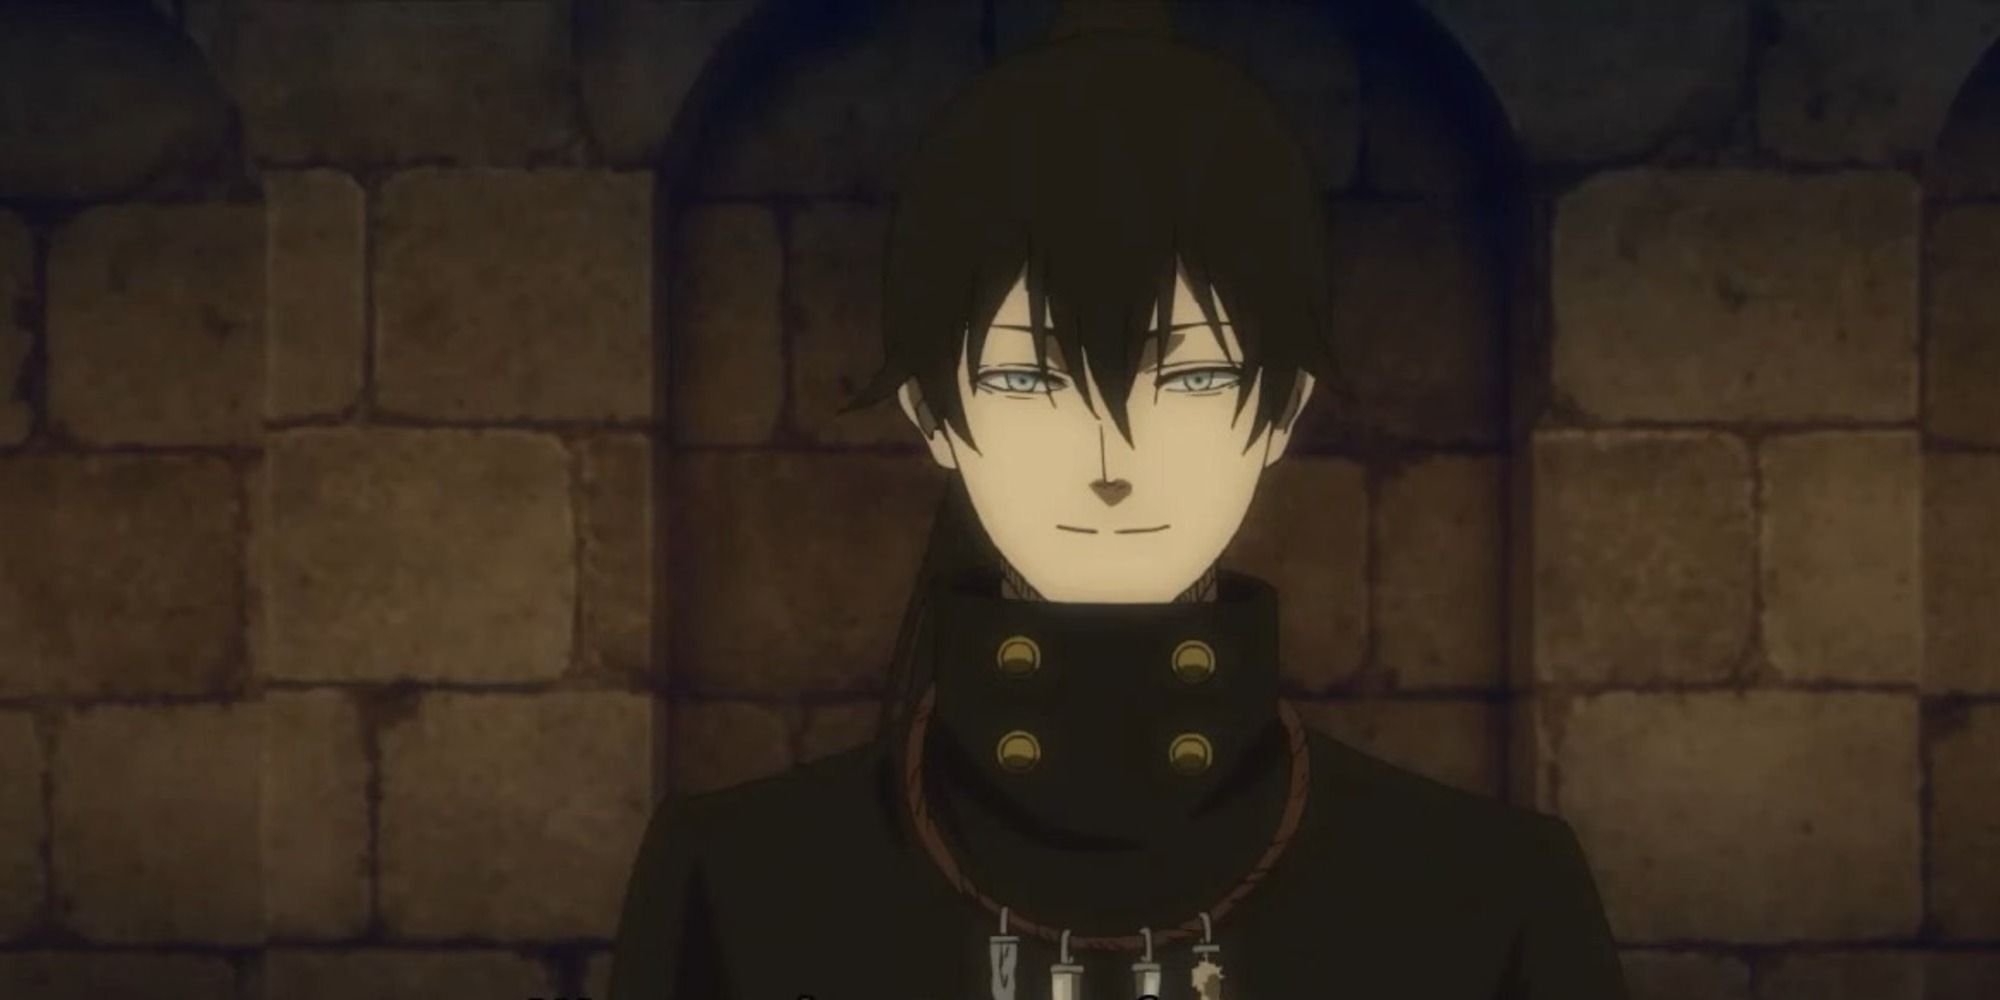 Nacht Faust from Black Clover smiling